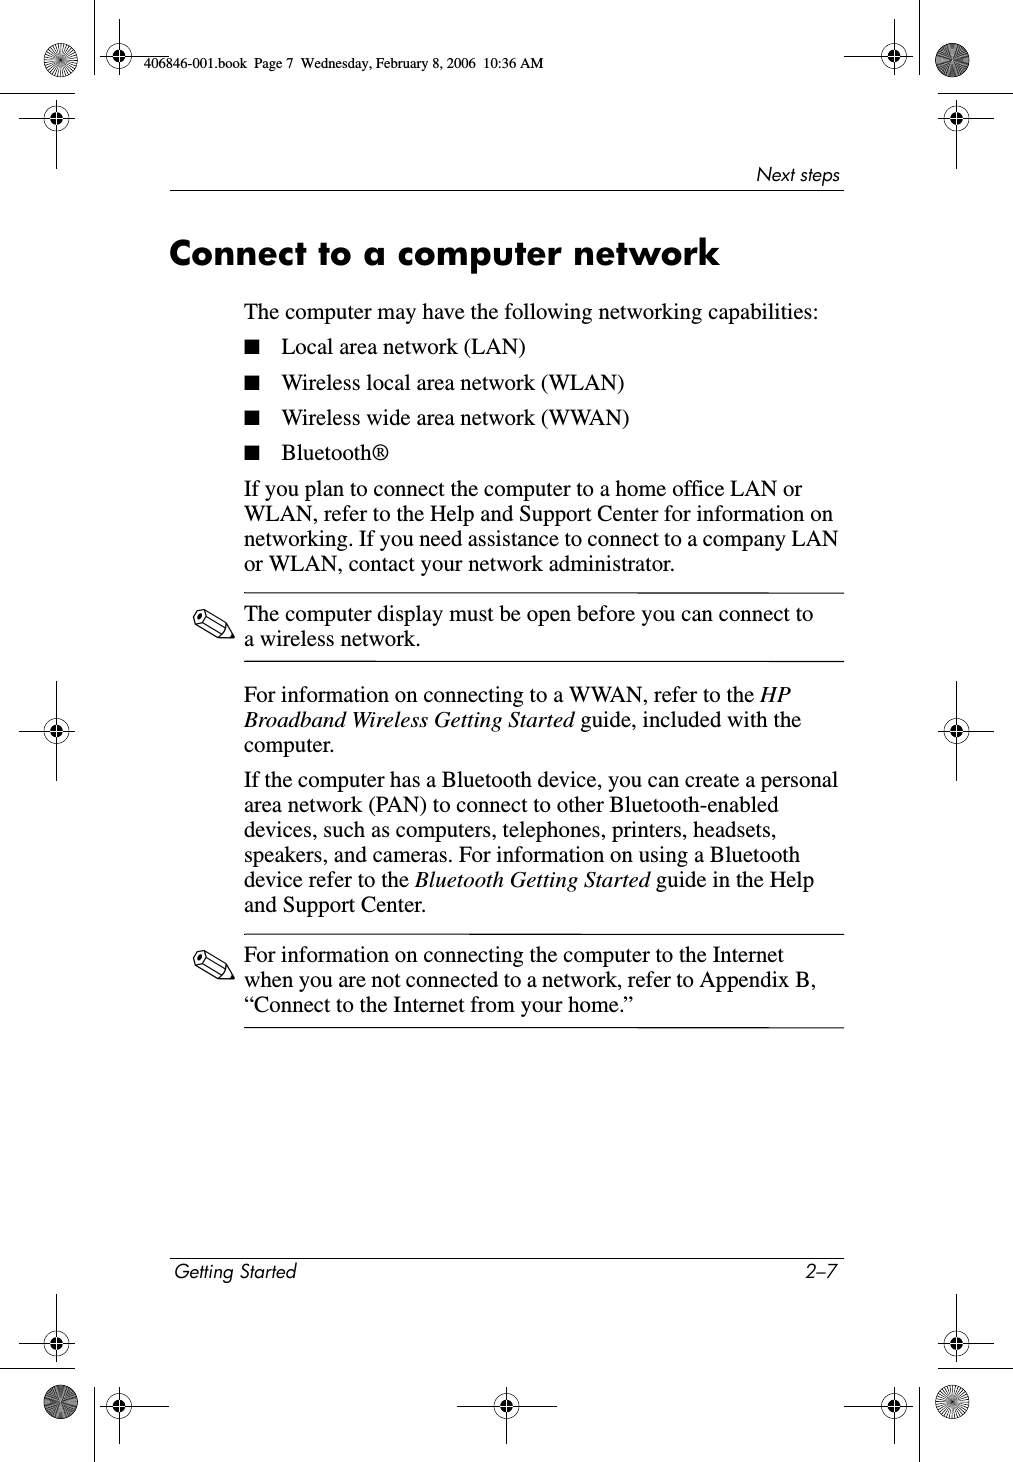 Next stepsGetting Started 2–7Connect to a computer networkThe computer may have the following networking capabilities:■Local area network (LAN)■Wireless local area network (WLAN)■Wireless wide area network (WWAN)■Bluetooth®If you plan to connect the computer to a home office LAN or WLAN, refer to the Help and Support Center for information on networking. If you need assistance to connect to a company LAN or WLAN, contact your network administrator. ✎The computer display must be open before you can connect to a wireless network.For information on connecting to a WWAN, refer to the HP Broadband Wireless Getting Started guide, included with the computer.If the computer has a Bluetooth device, you can create a personal area network (PAN) to connect to other Bluetooth-enabled devices, such as computers, telephones, printers, headsets, speakers, and cameras. For information on using a Bluetooth device refer to the Bluetooth Getting Started guide in the Help and Support Center.✎For information on connecting the computer to the Internet when you are not connected to a network, refer to Appendix B, “Connect to the Internet from your home.”406846-001.book  Page 7  Wednesday, February 8, 2006  10:36 AM